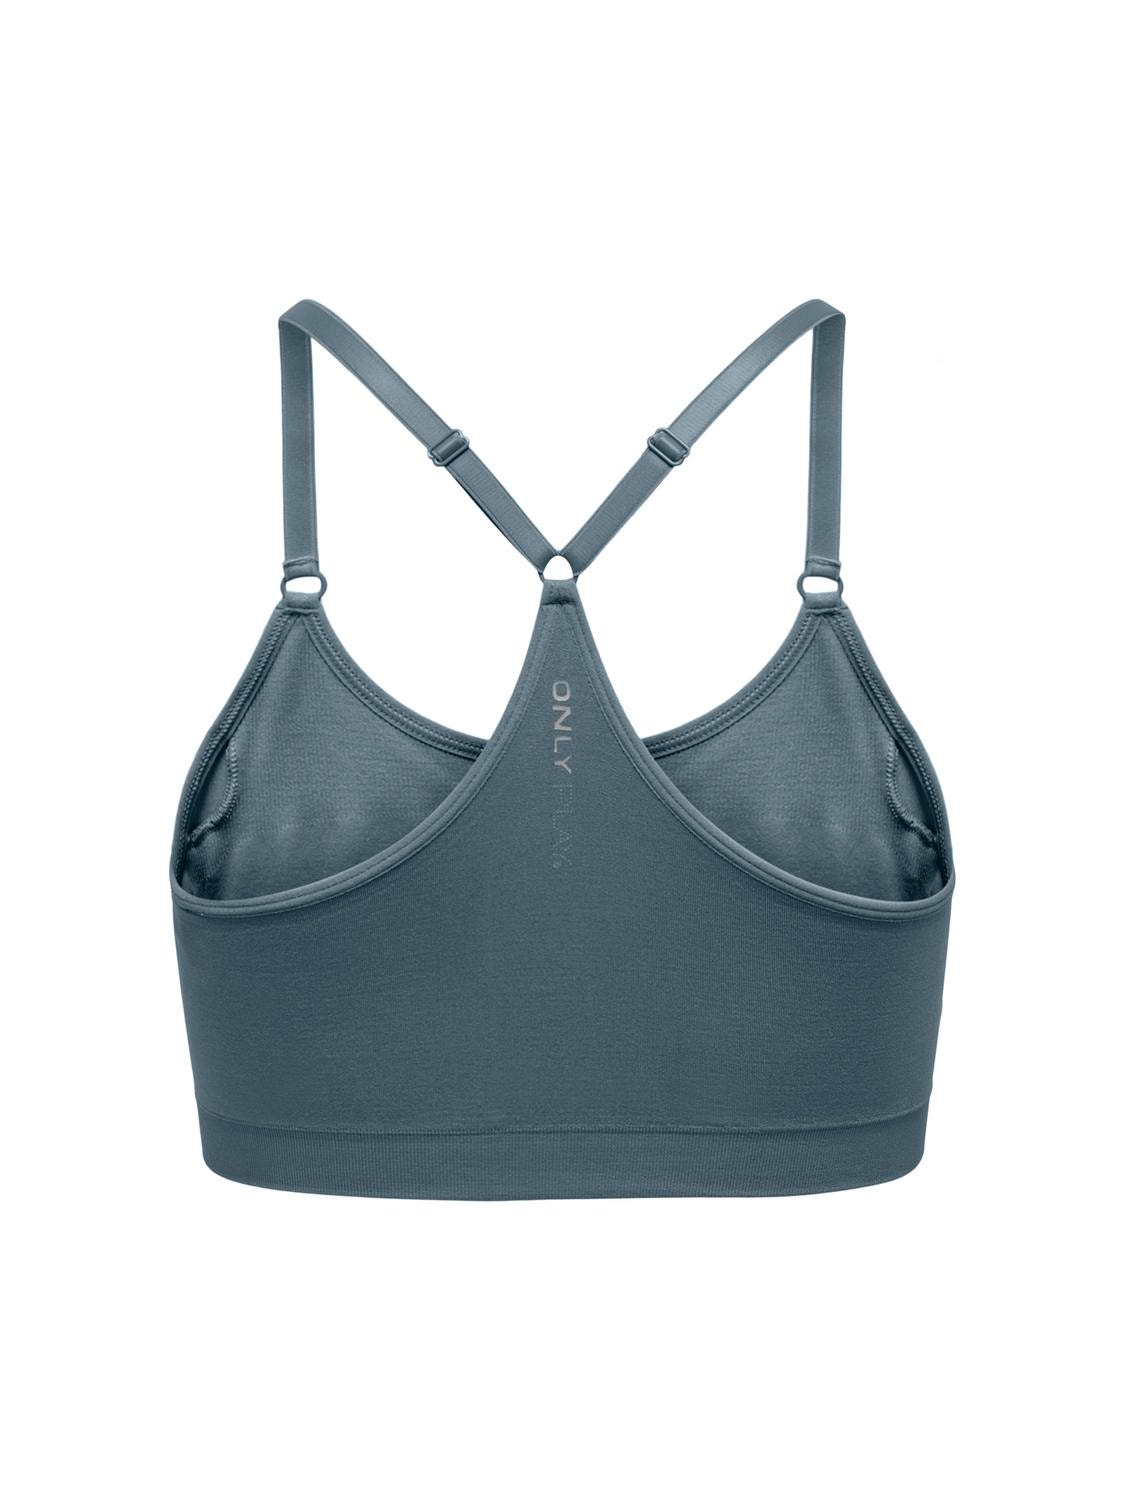 ONLY Adjustable straps Bras -Stormy Weather - 15140291